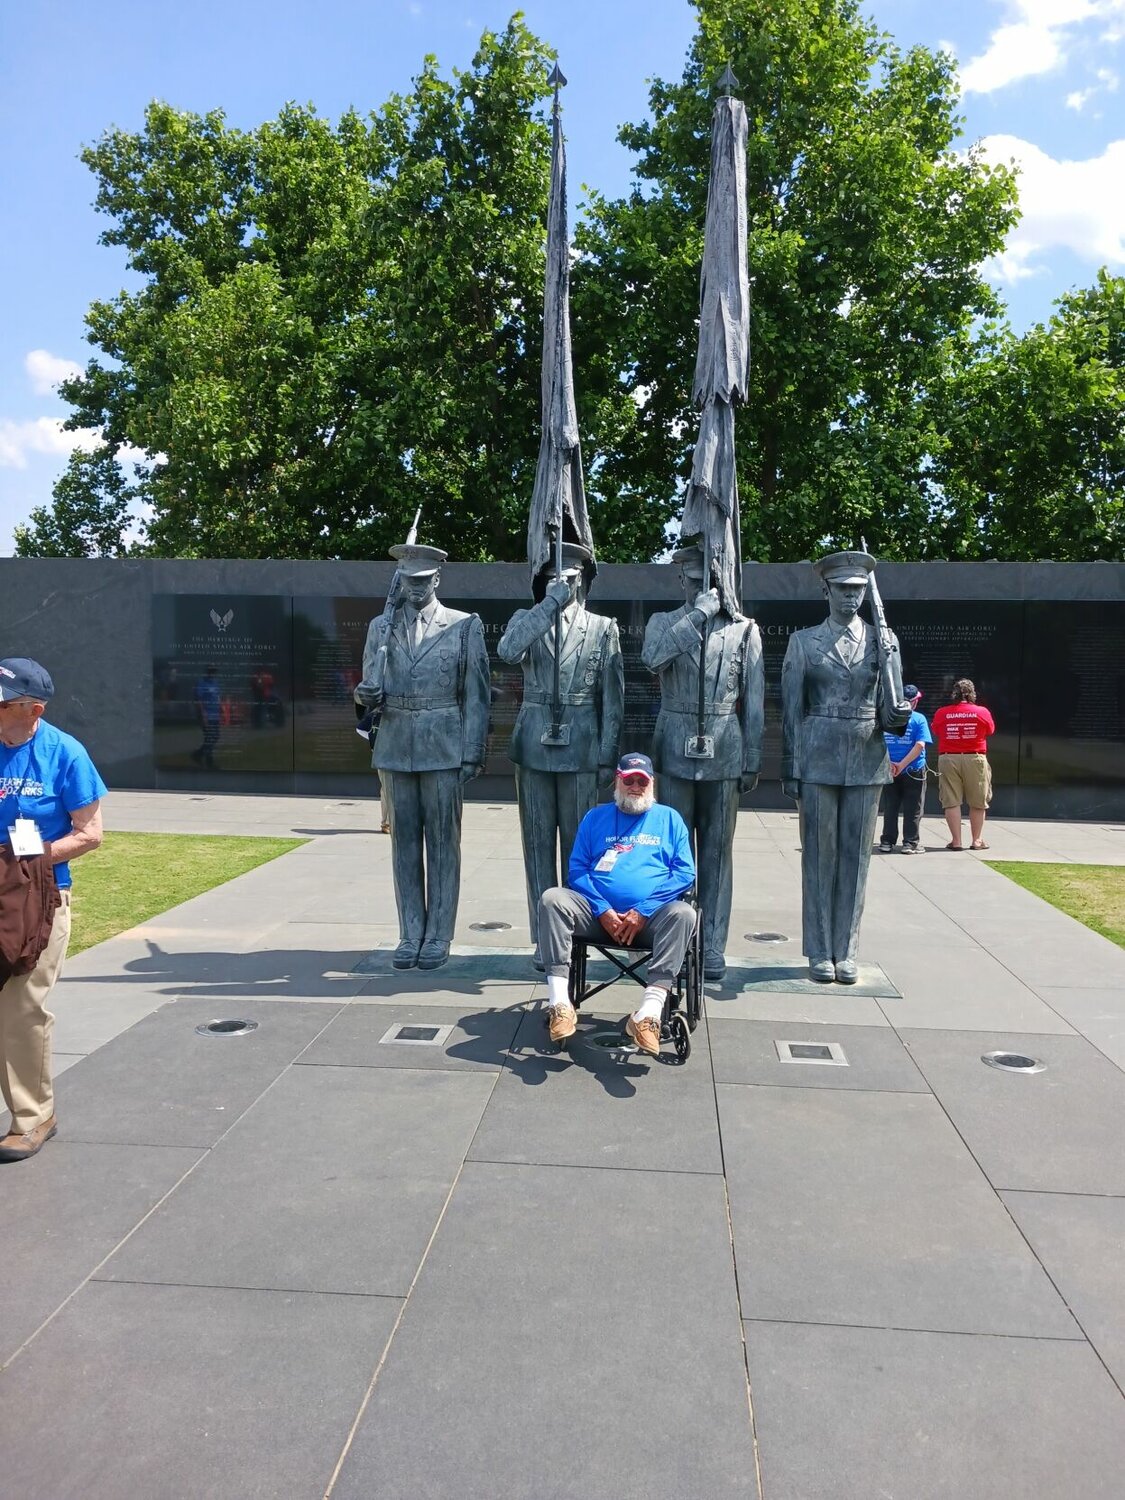 Wayne Cone at the Honor Guard sculpture acts as a human complement to the steel spires of the Air Force Memorial. CONTRIBUTED PHOTO